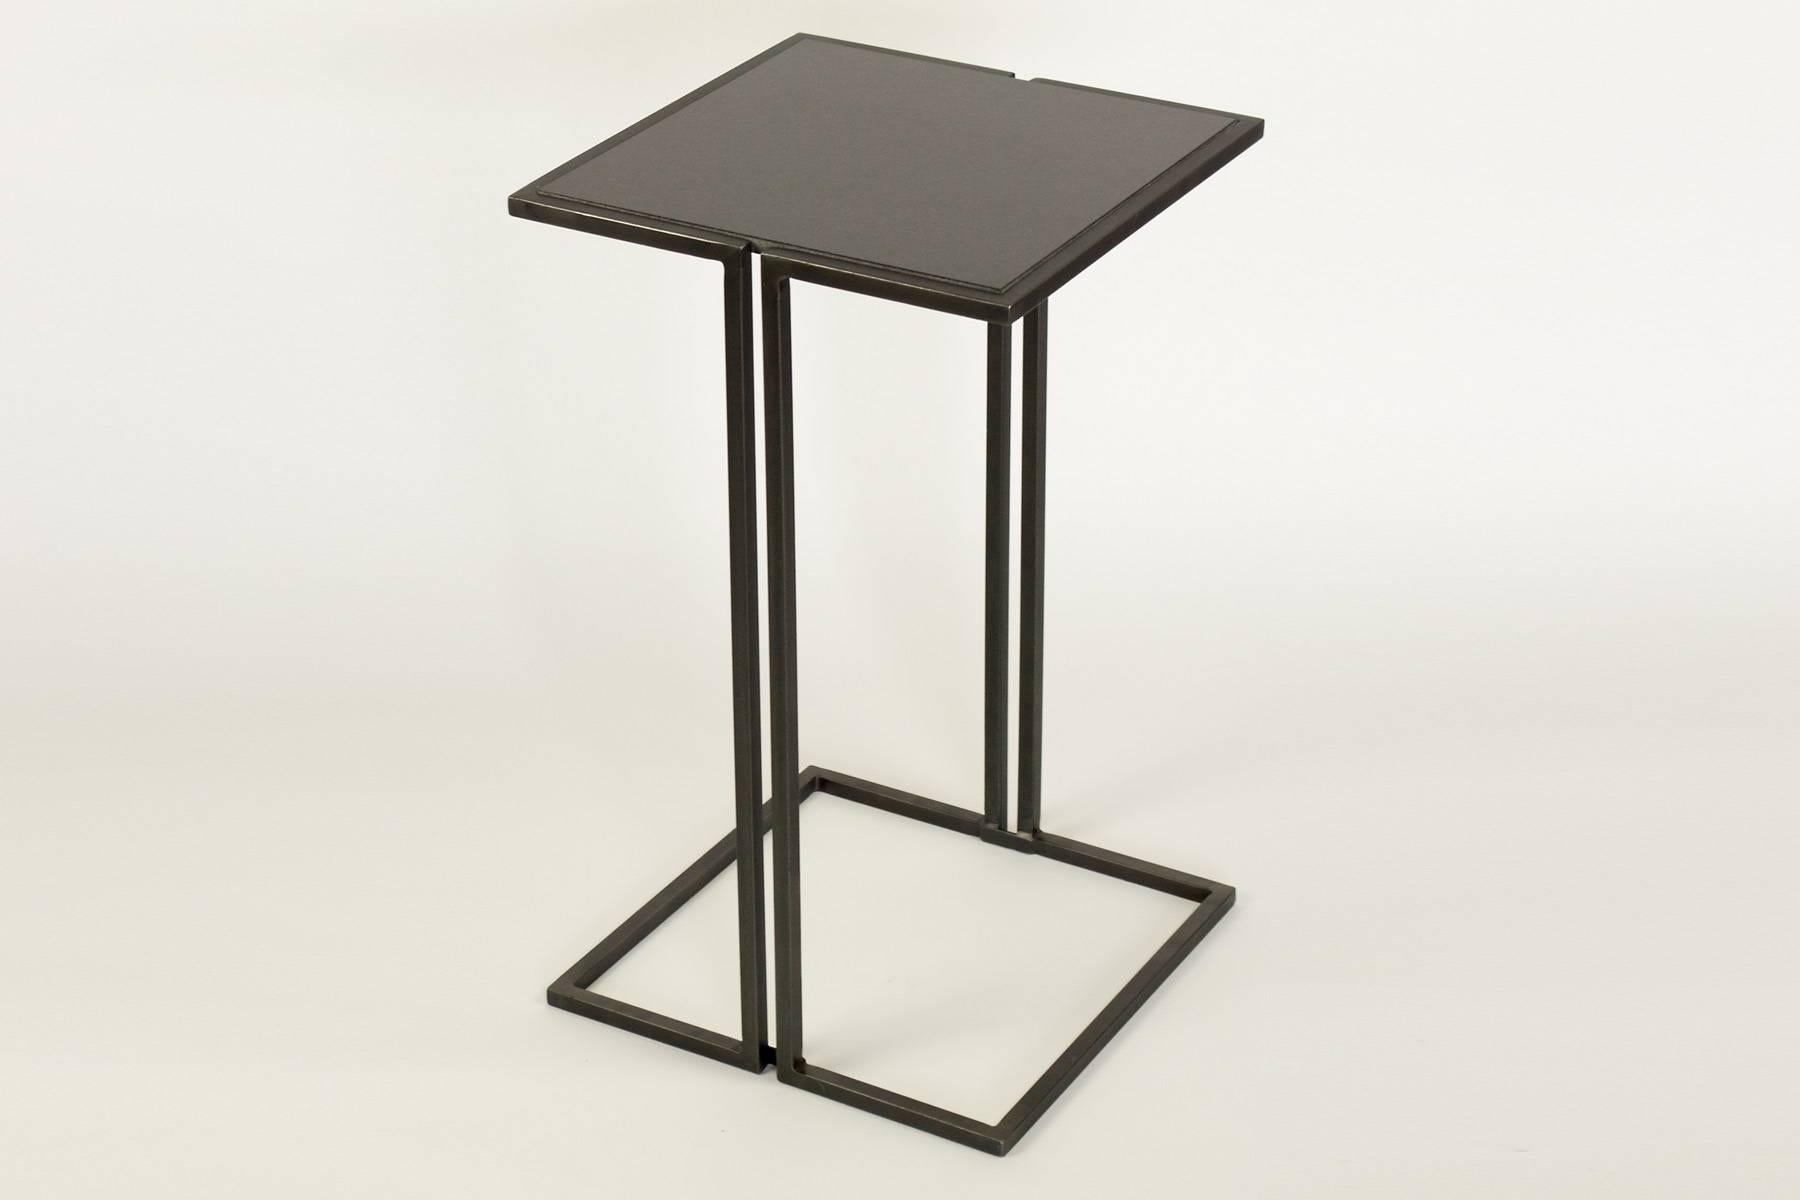 Two small-scale side table. Minimalist design with polished steel frame and black granite tops. Tables are in our showroom in the 1stdibs Gallery in NYC.